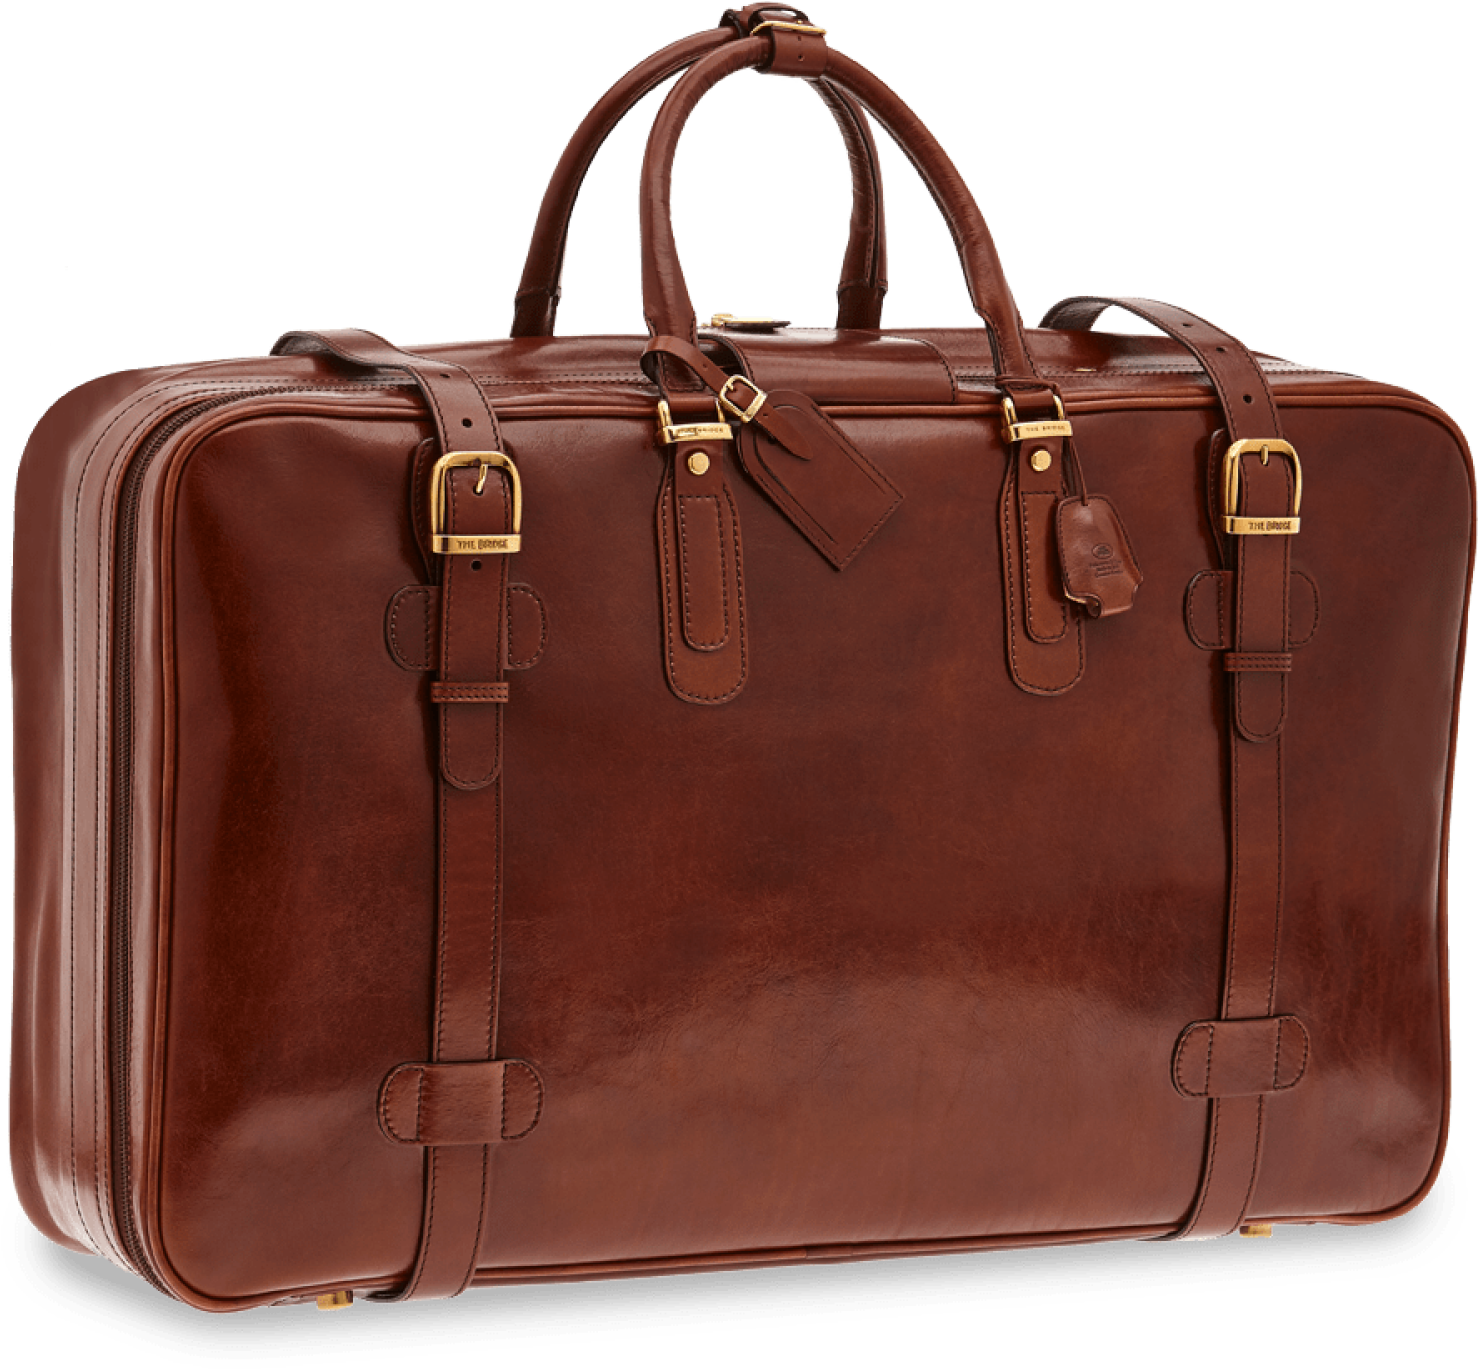 A Brown Leather Suitcase With Straps